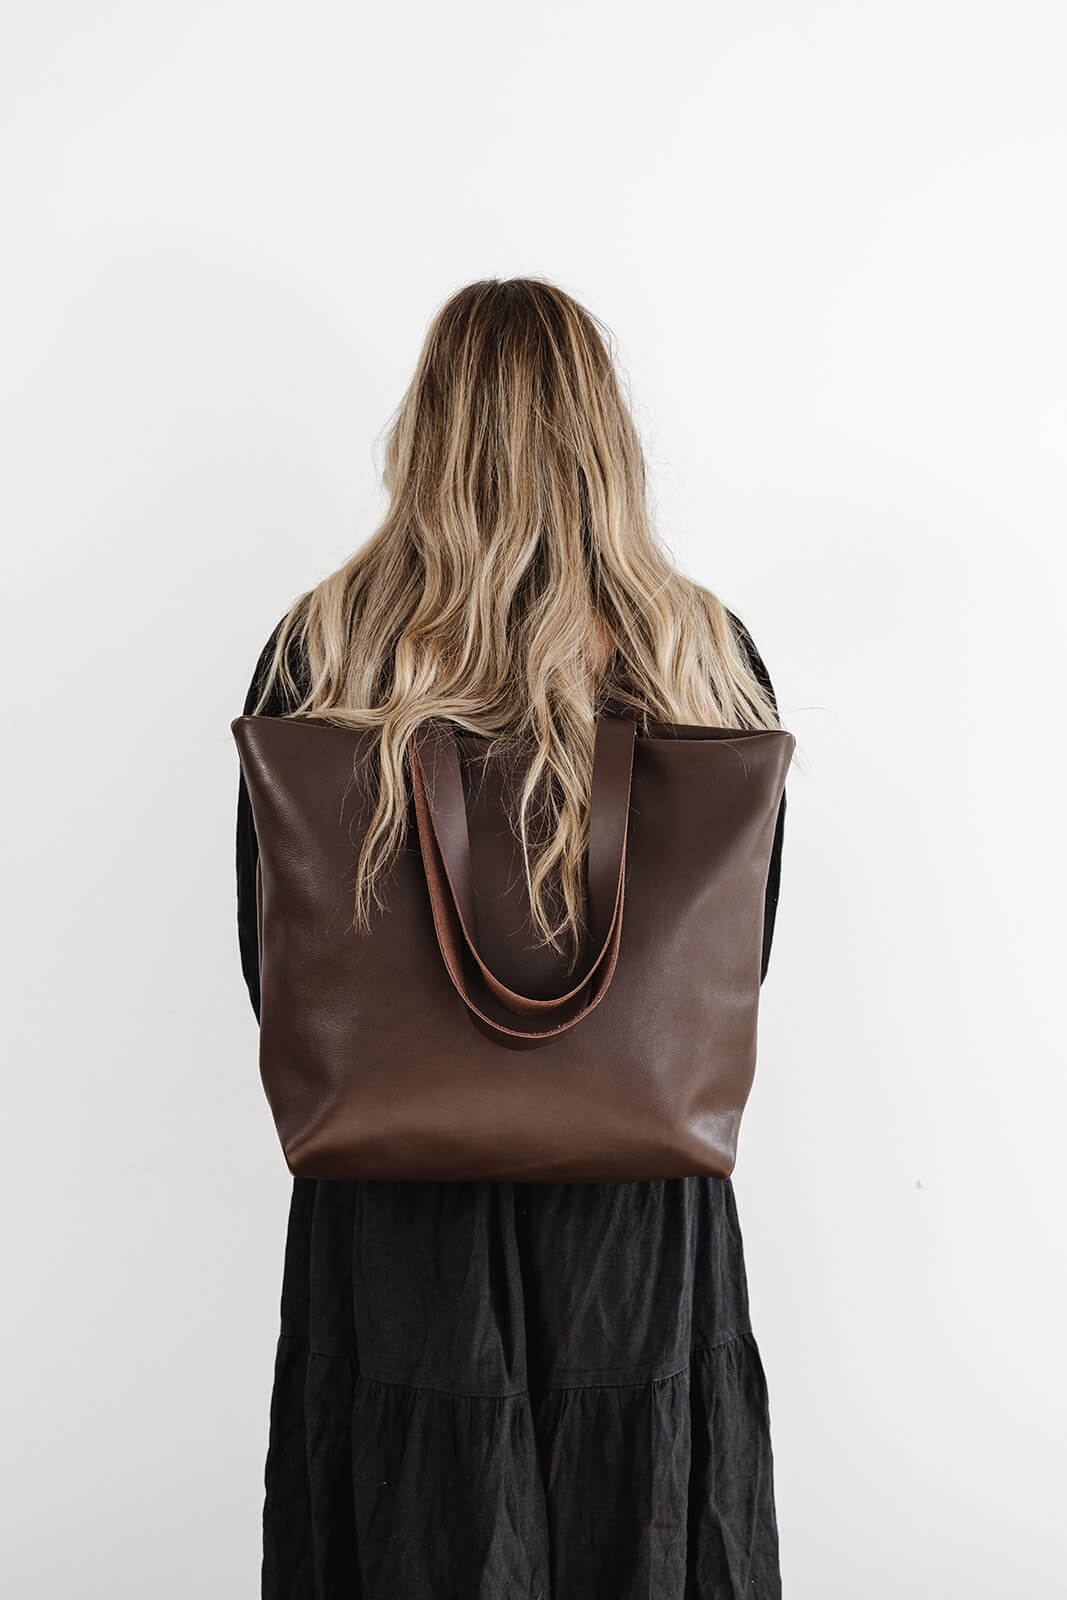 Product pic of the Chocolate Brown Leather Backpack & Tote by Ella Jackson. The backpack is being worn by a woman with a black dress and long sandy coloured hair with a white background